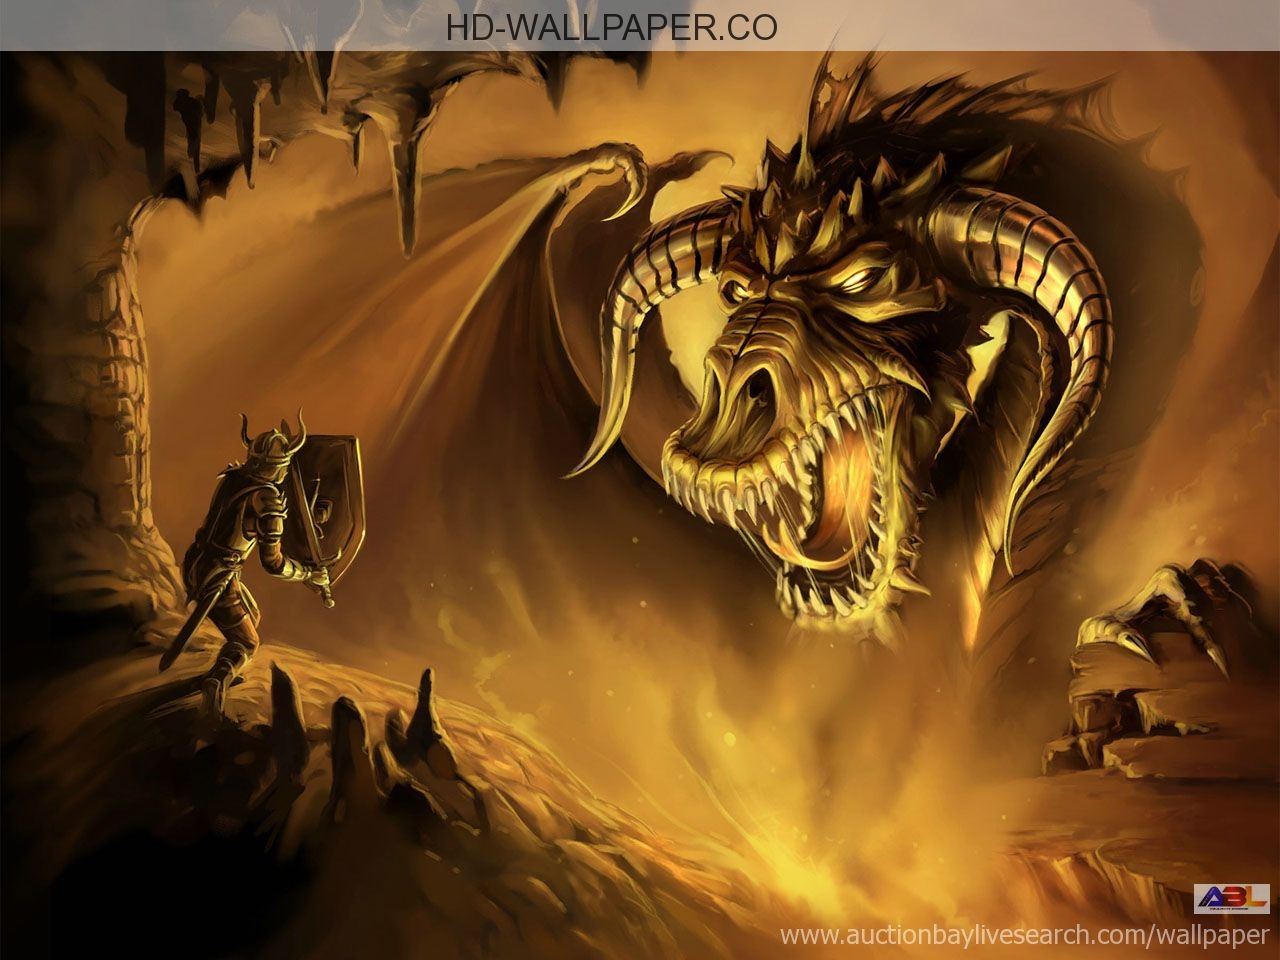 Cool Wallpaper Dragon Animated Wallpoop The Site